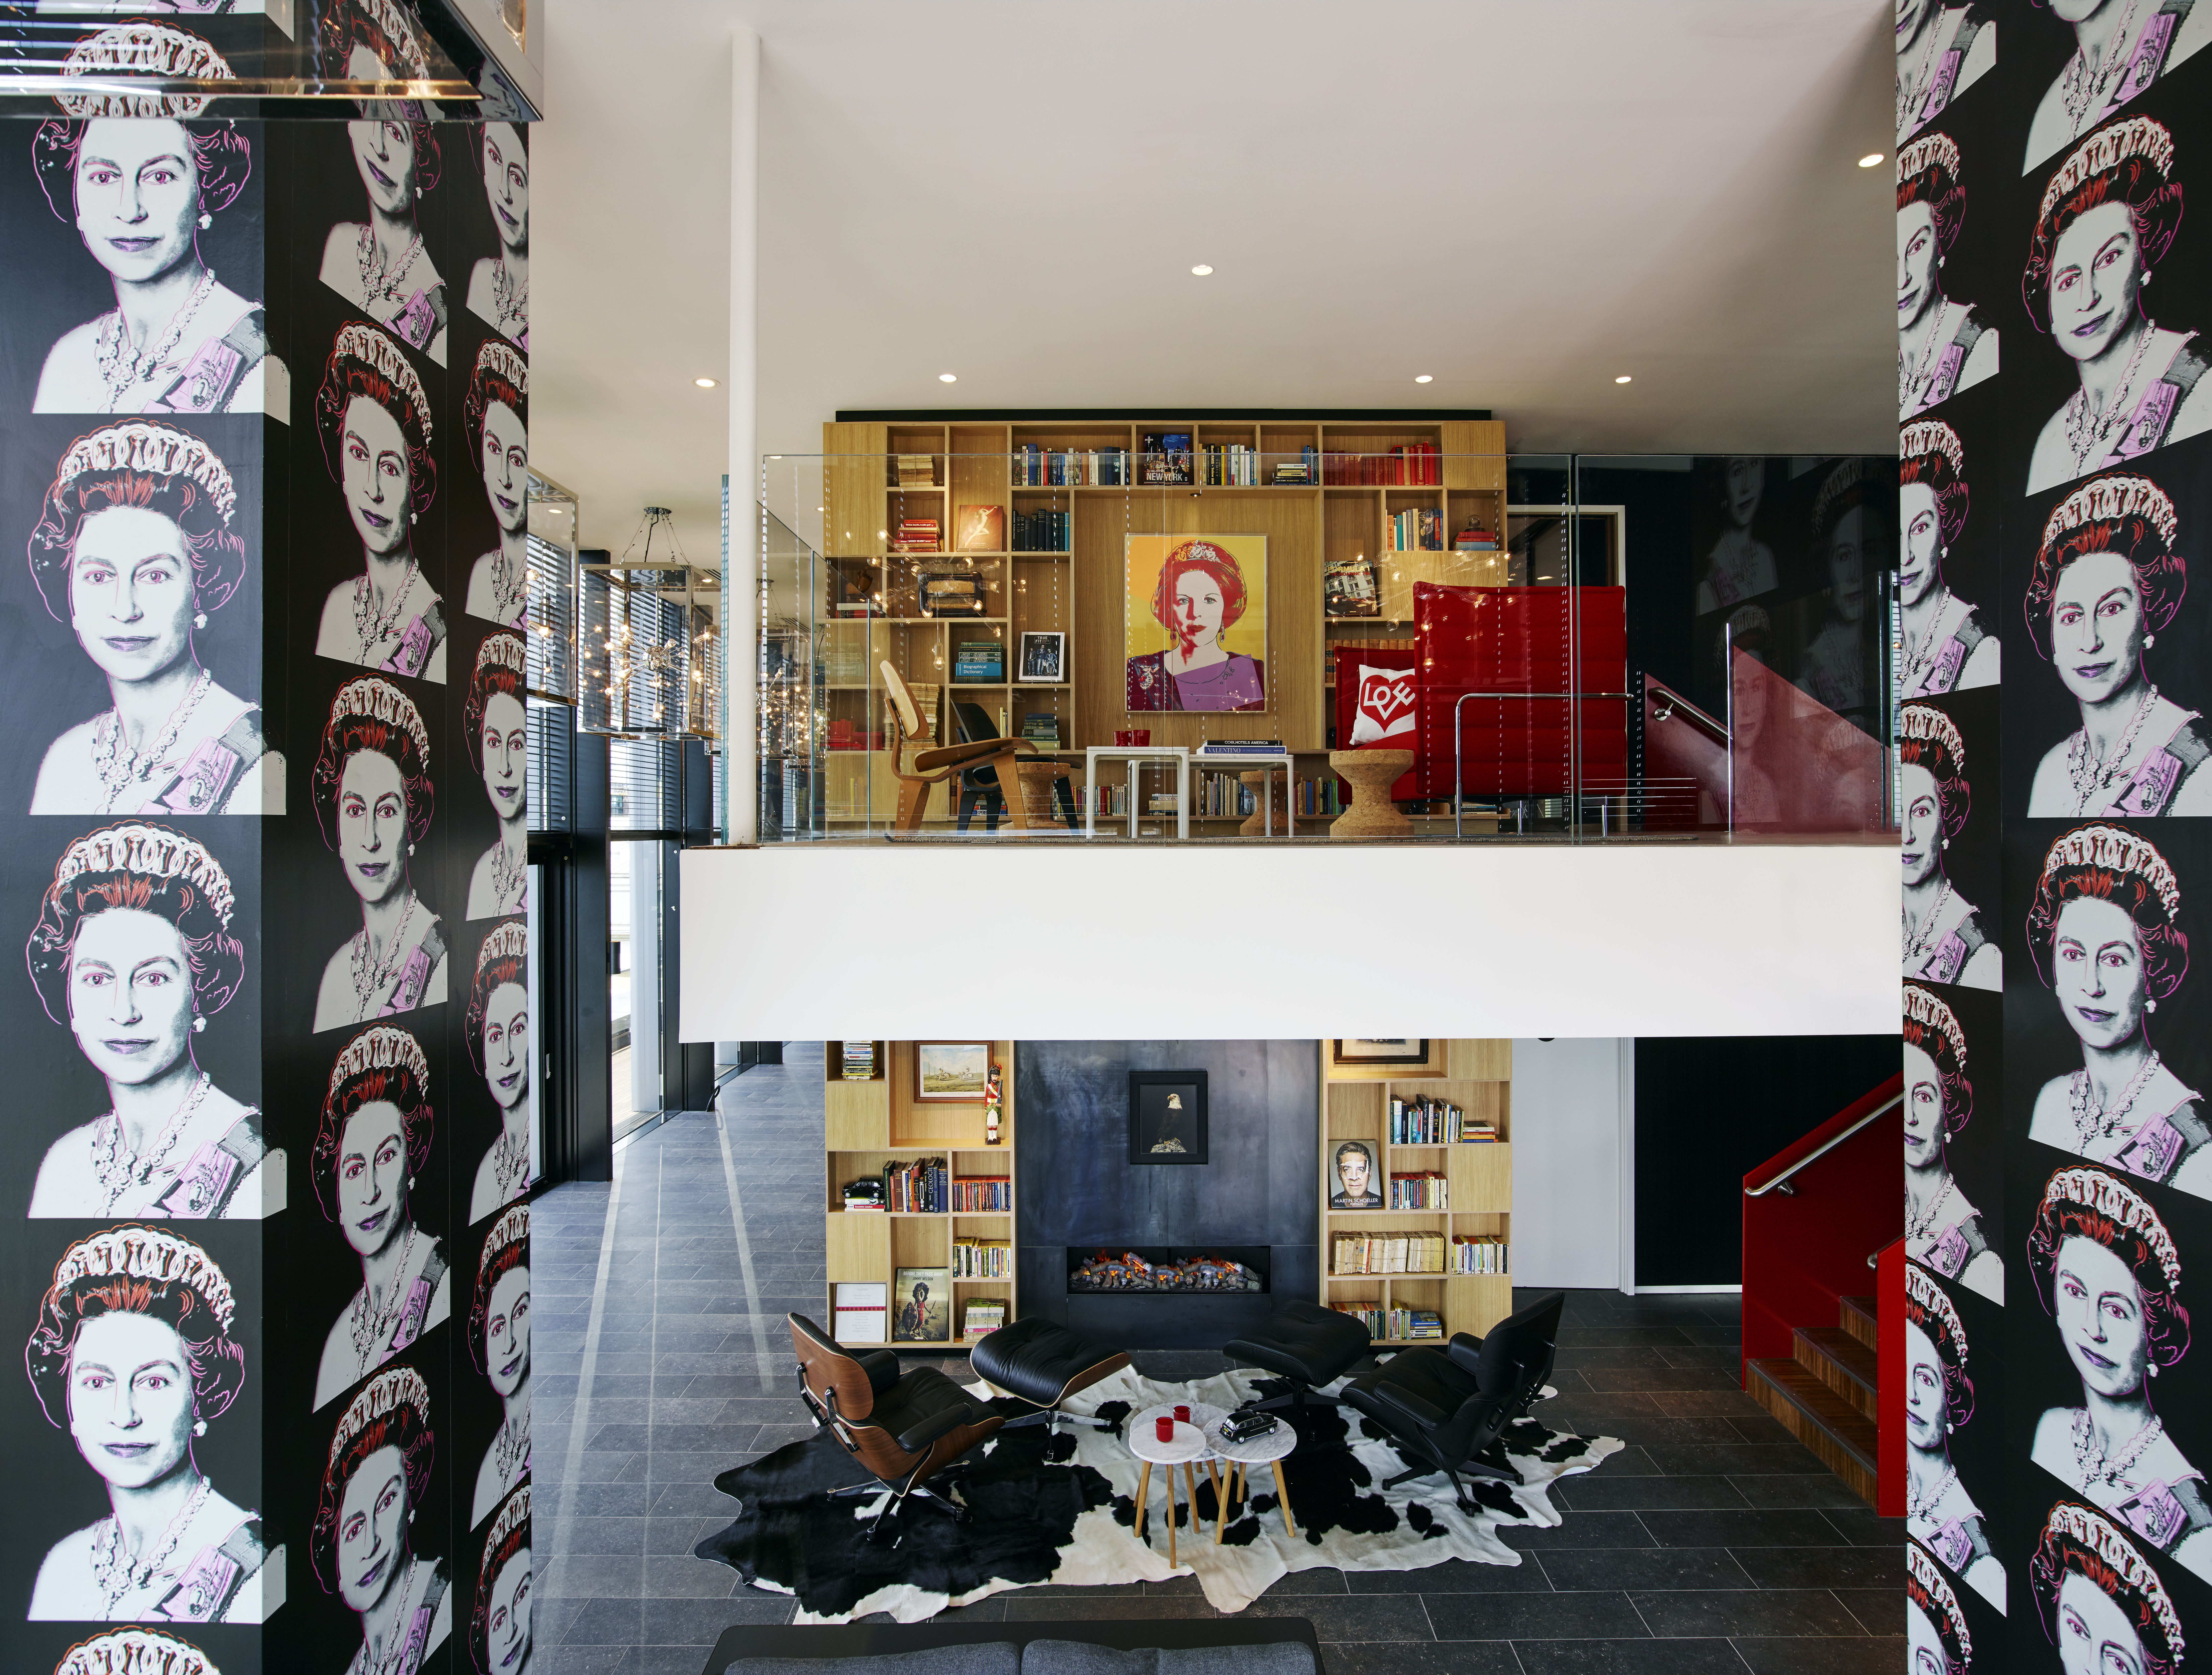 citizenM Tower of London